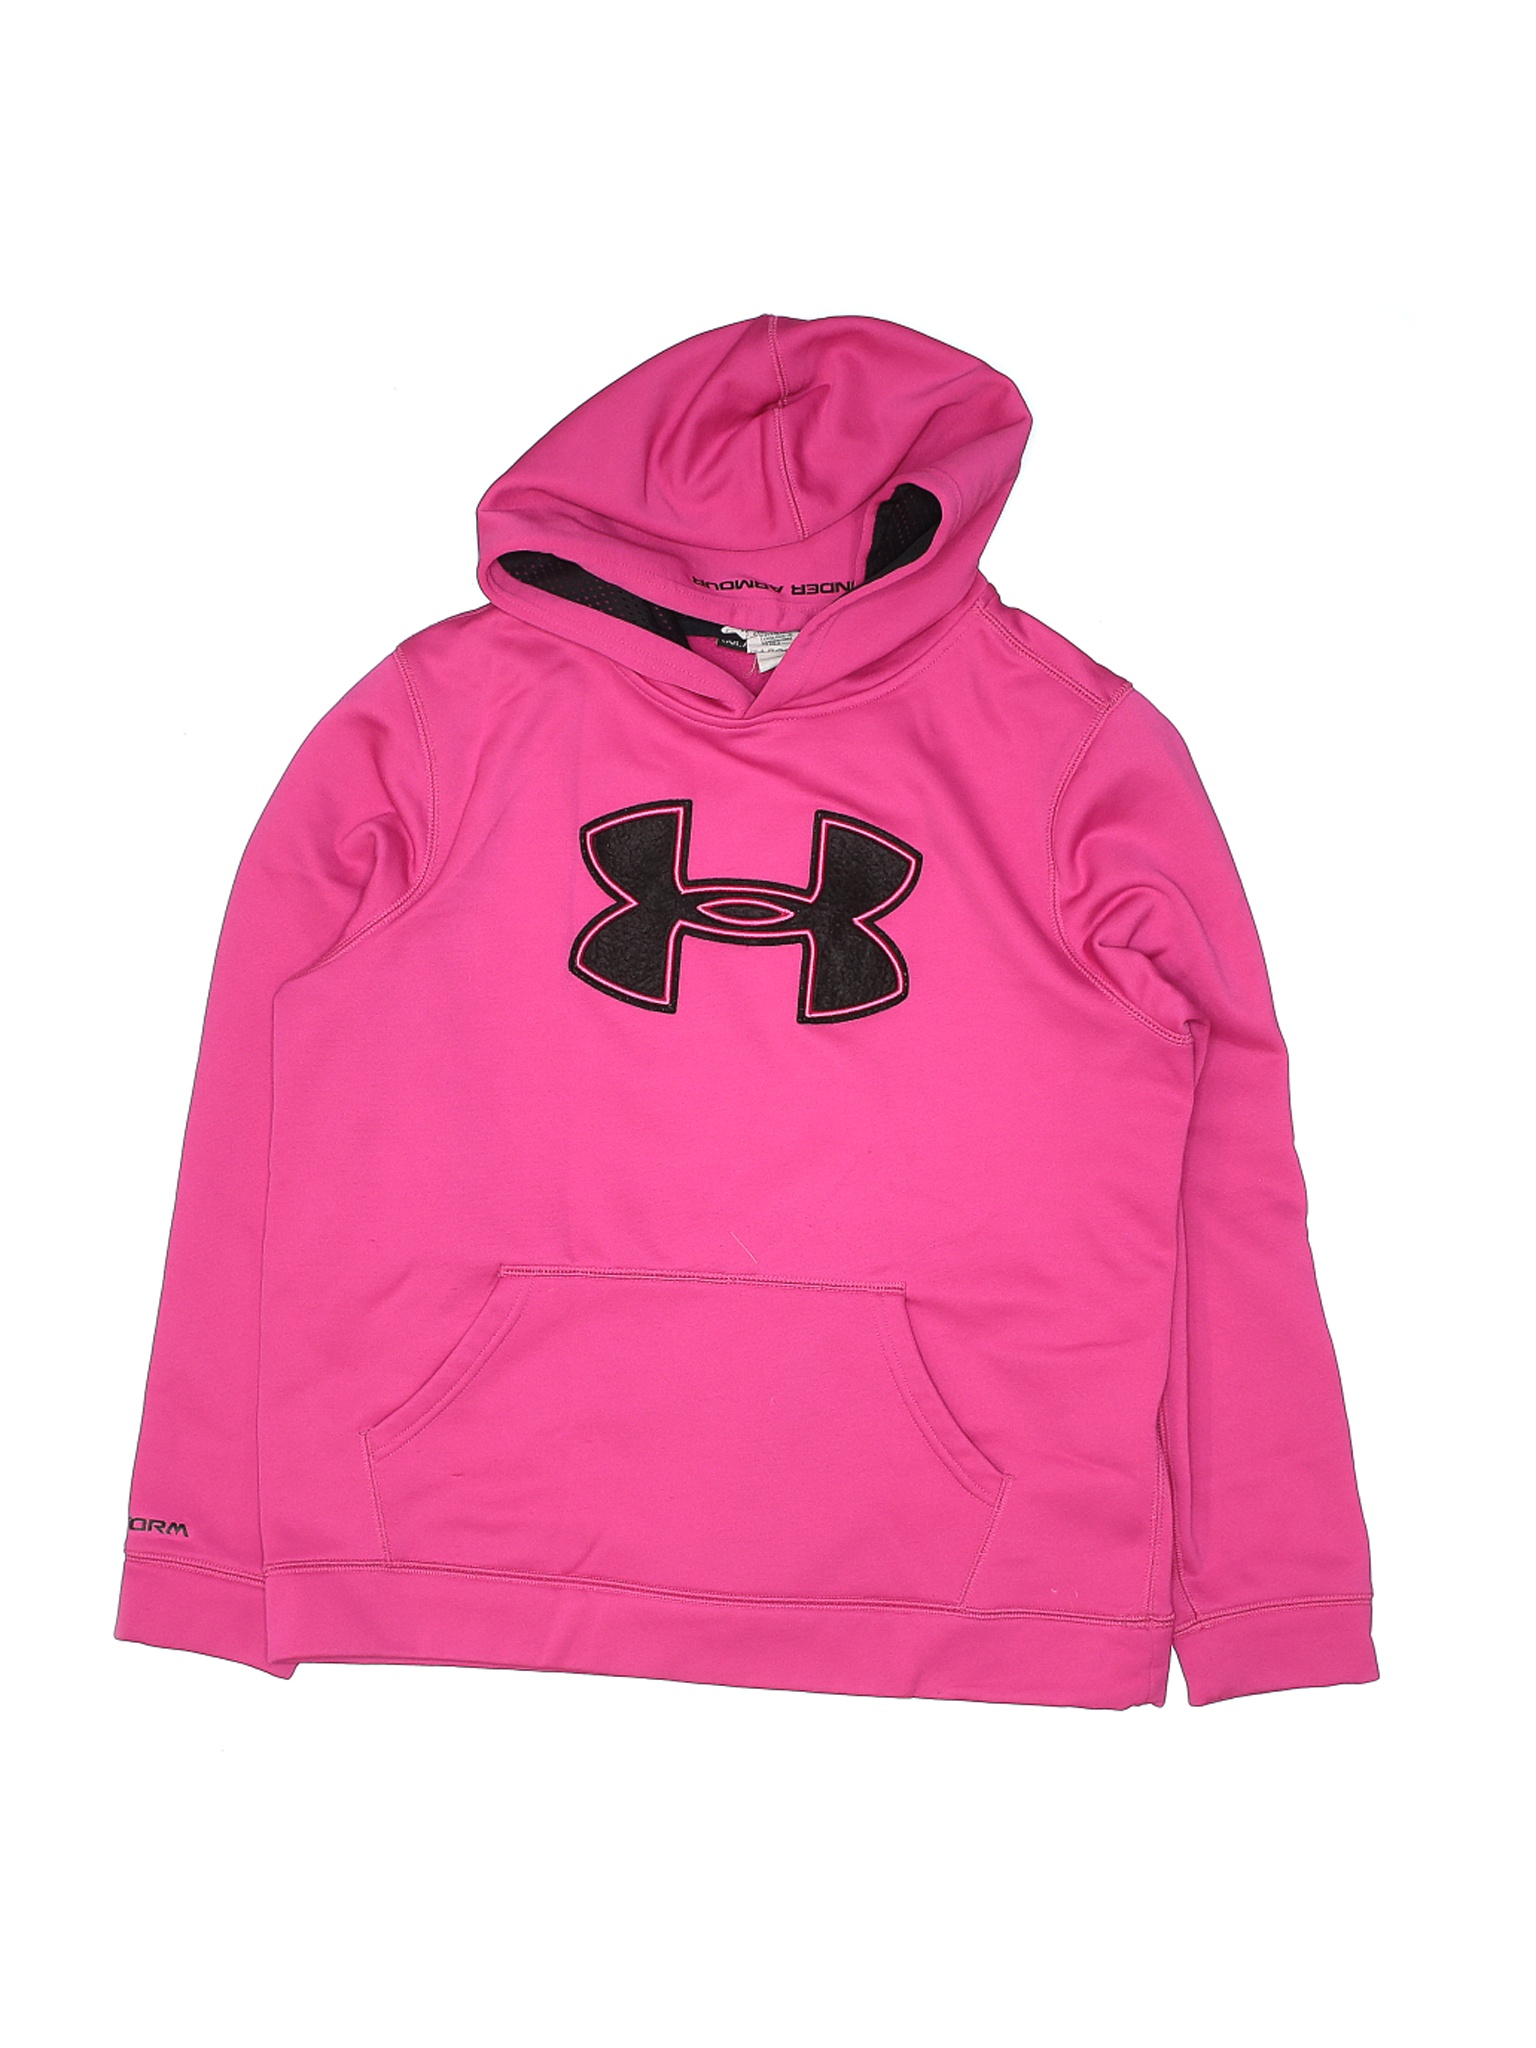 youth xl under armour hoodie